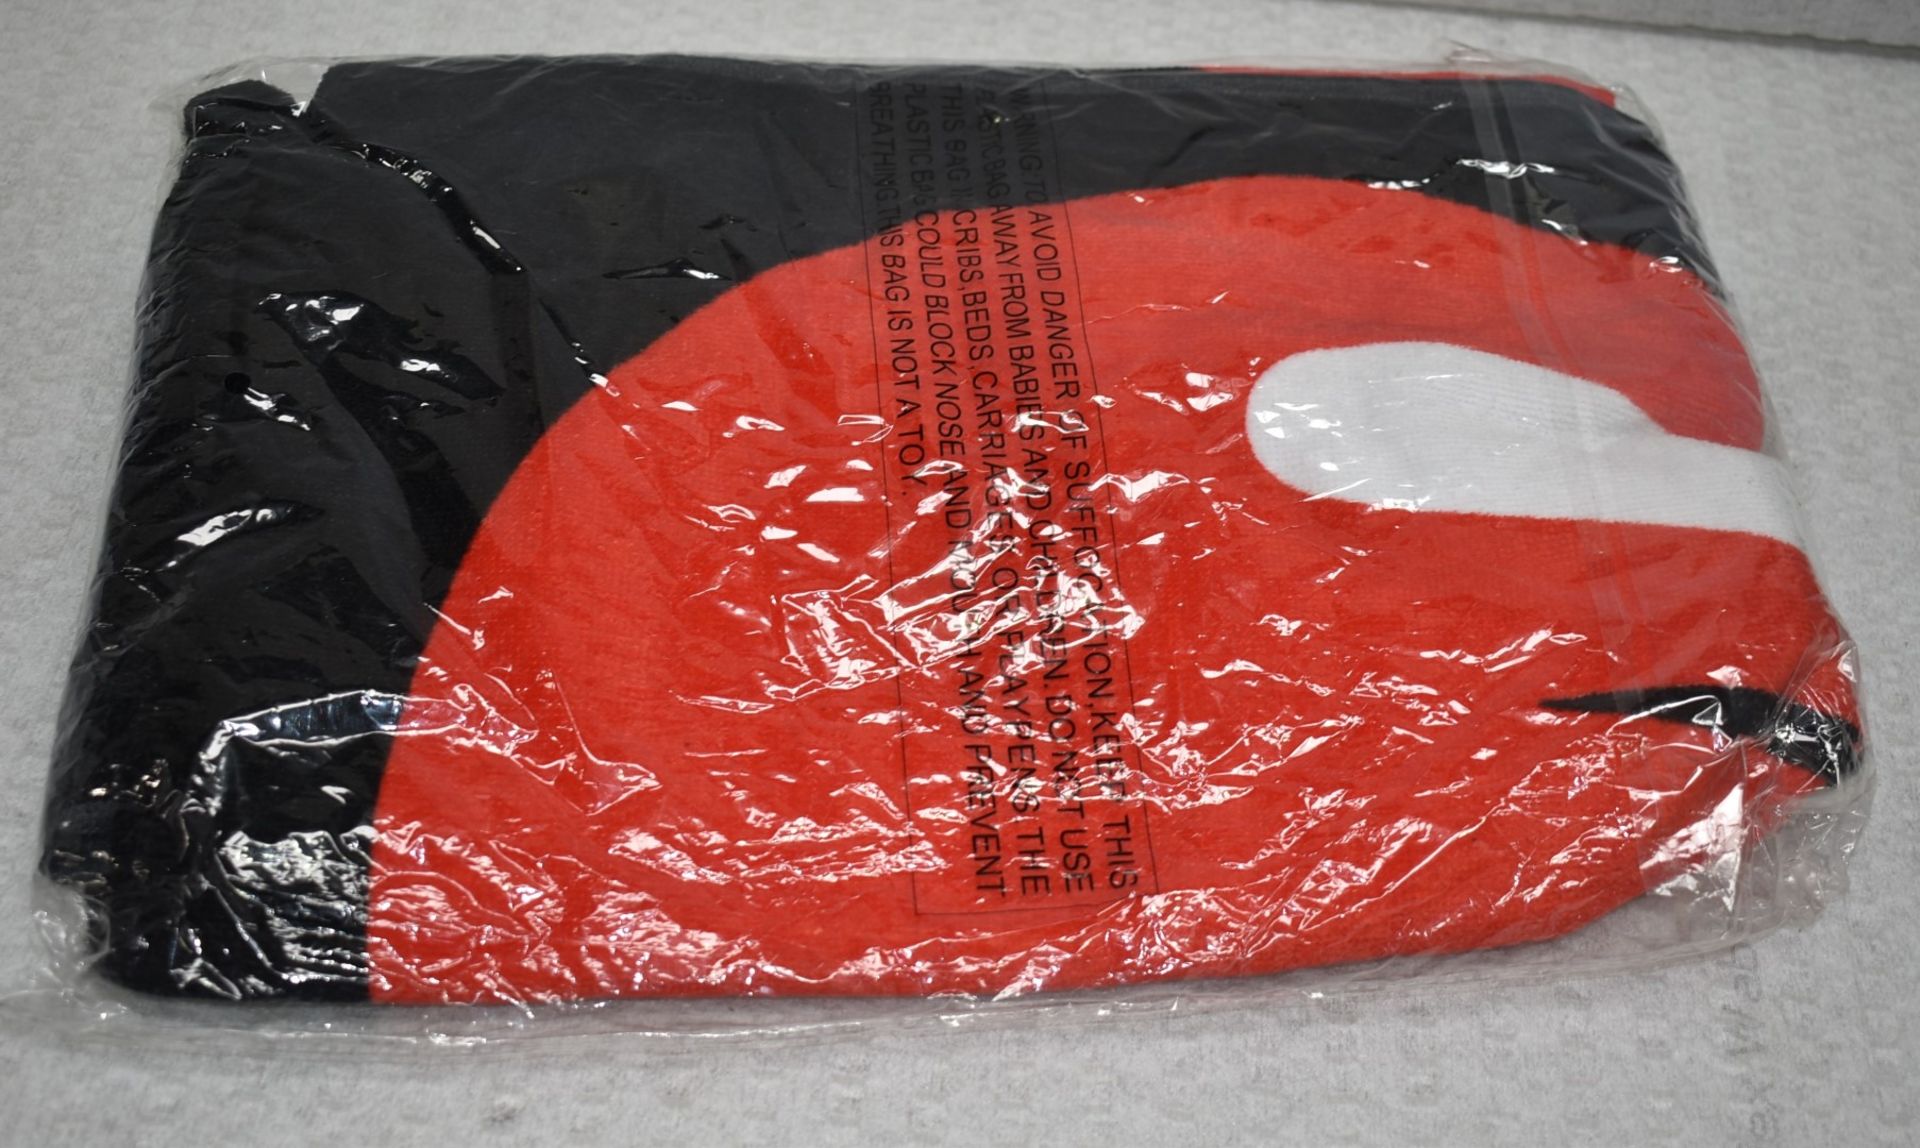 1 x Rolling Stones Large Beach Towel - Features the Iconic Tongue and Lips Logo on the Back - - Image 2 of 2